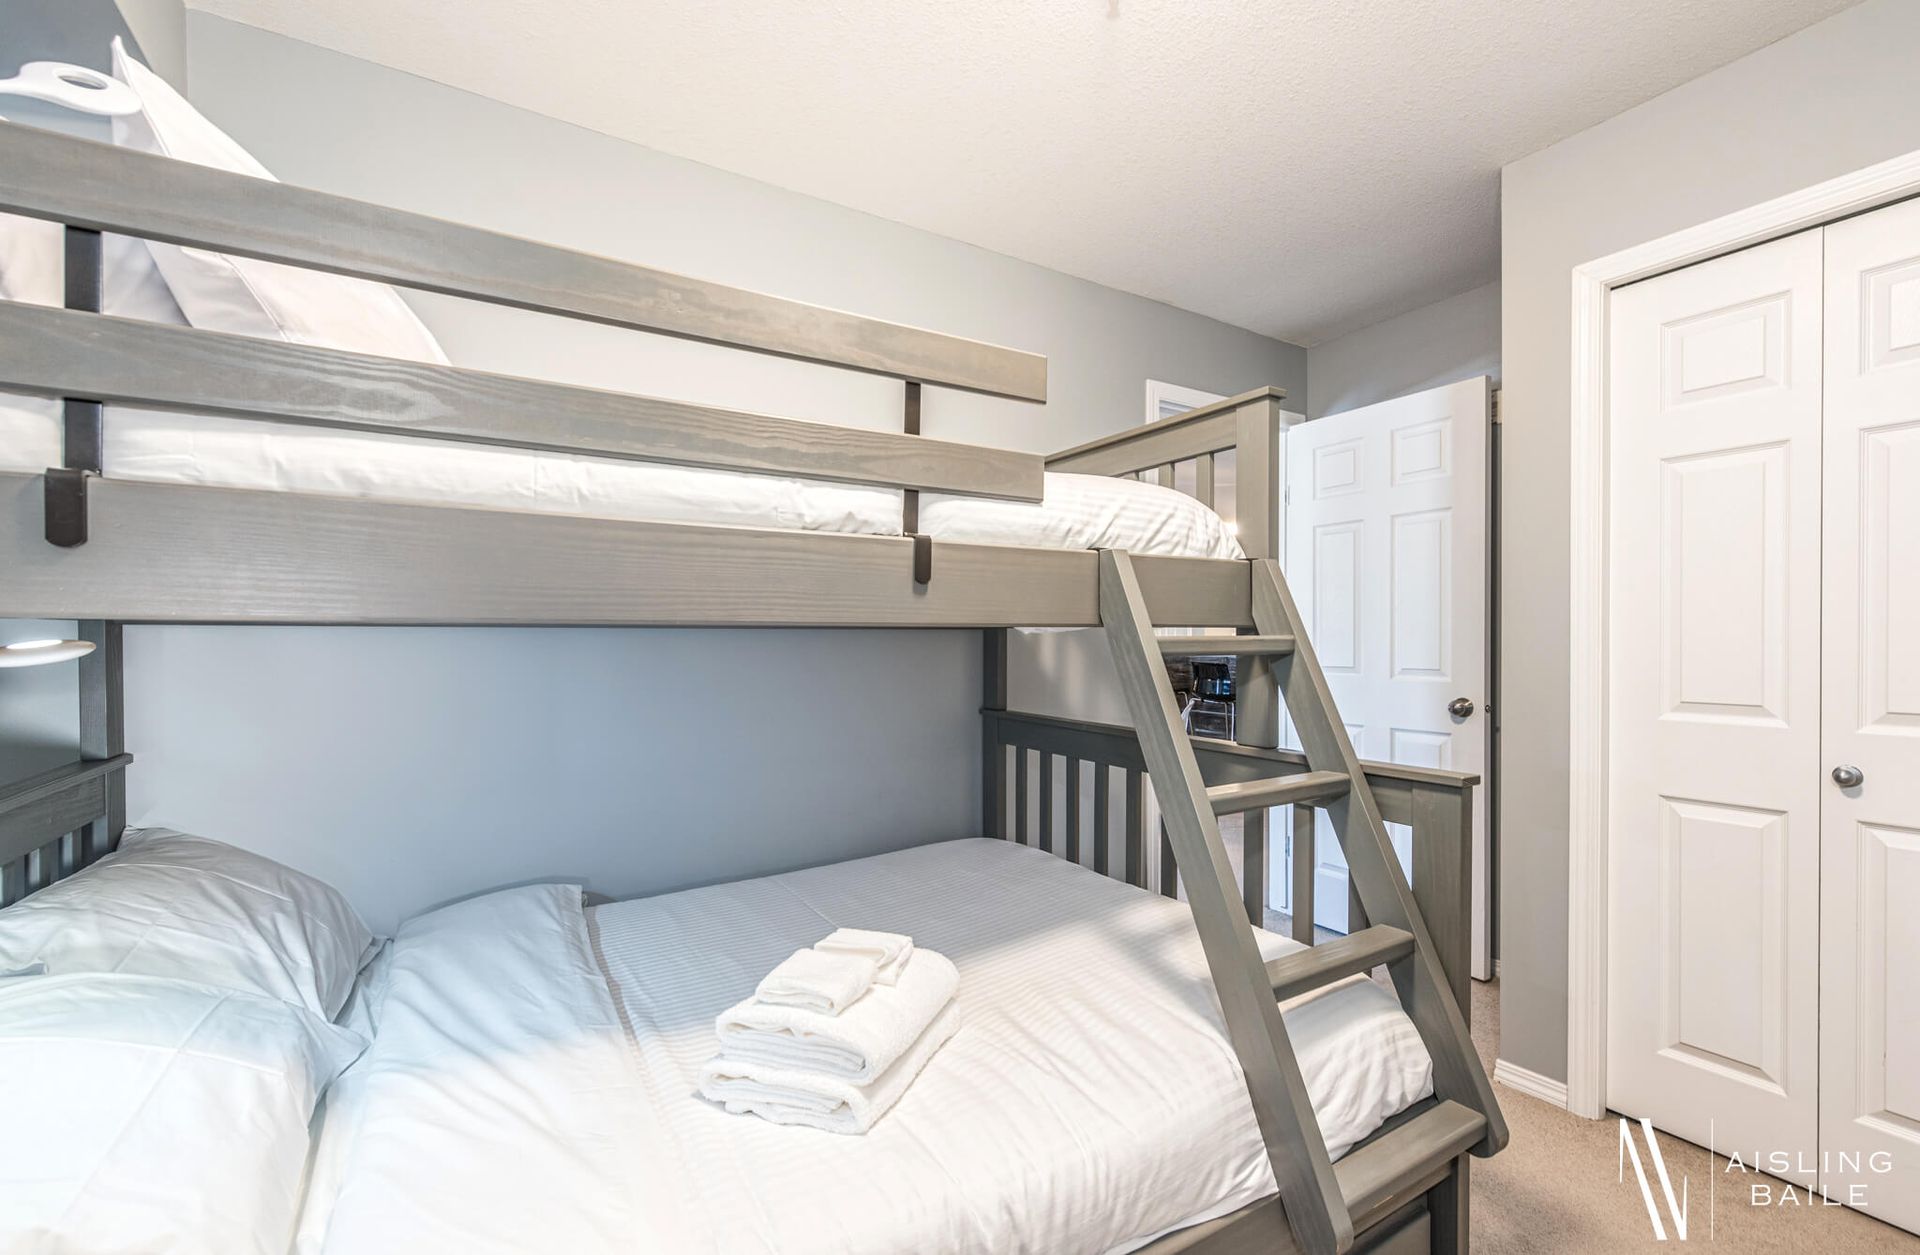 Second bedroom with a single-over-double bunk bed with the Trendy condo at Lake Windermere Pointe in Invermere, a BC Vacation Rental hosted by Aisling Baile Property Management.